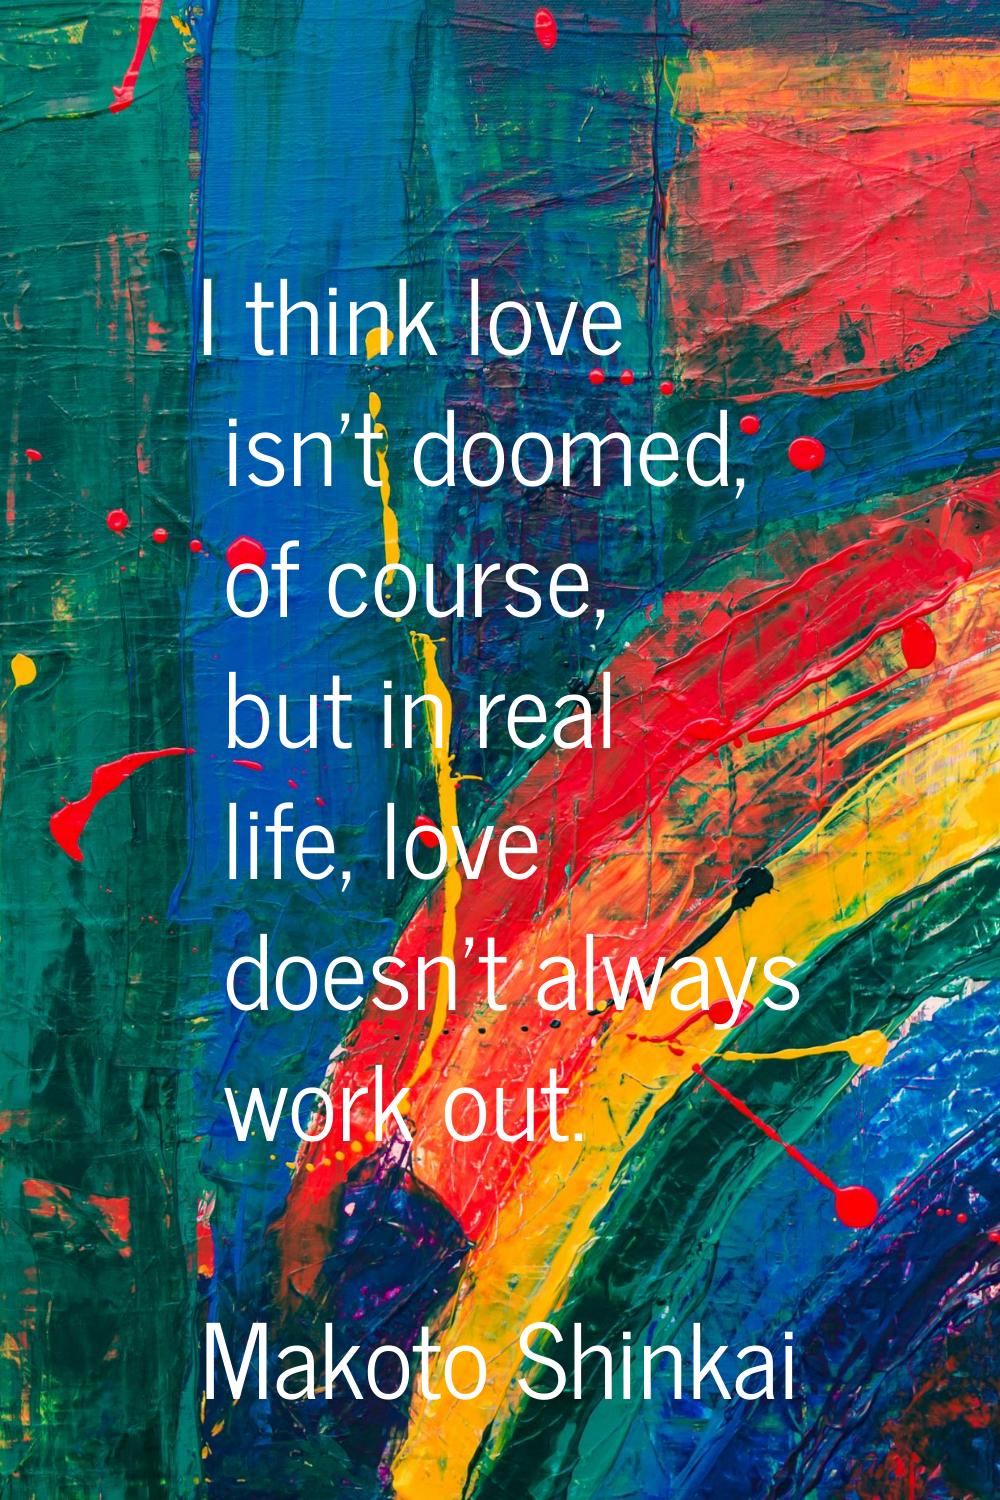 I think love isn't doomed, of course, but in real life, love doesn't always work out.